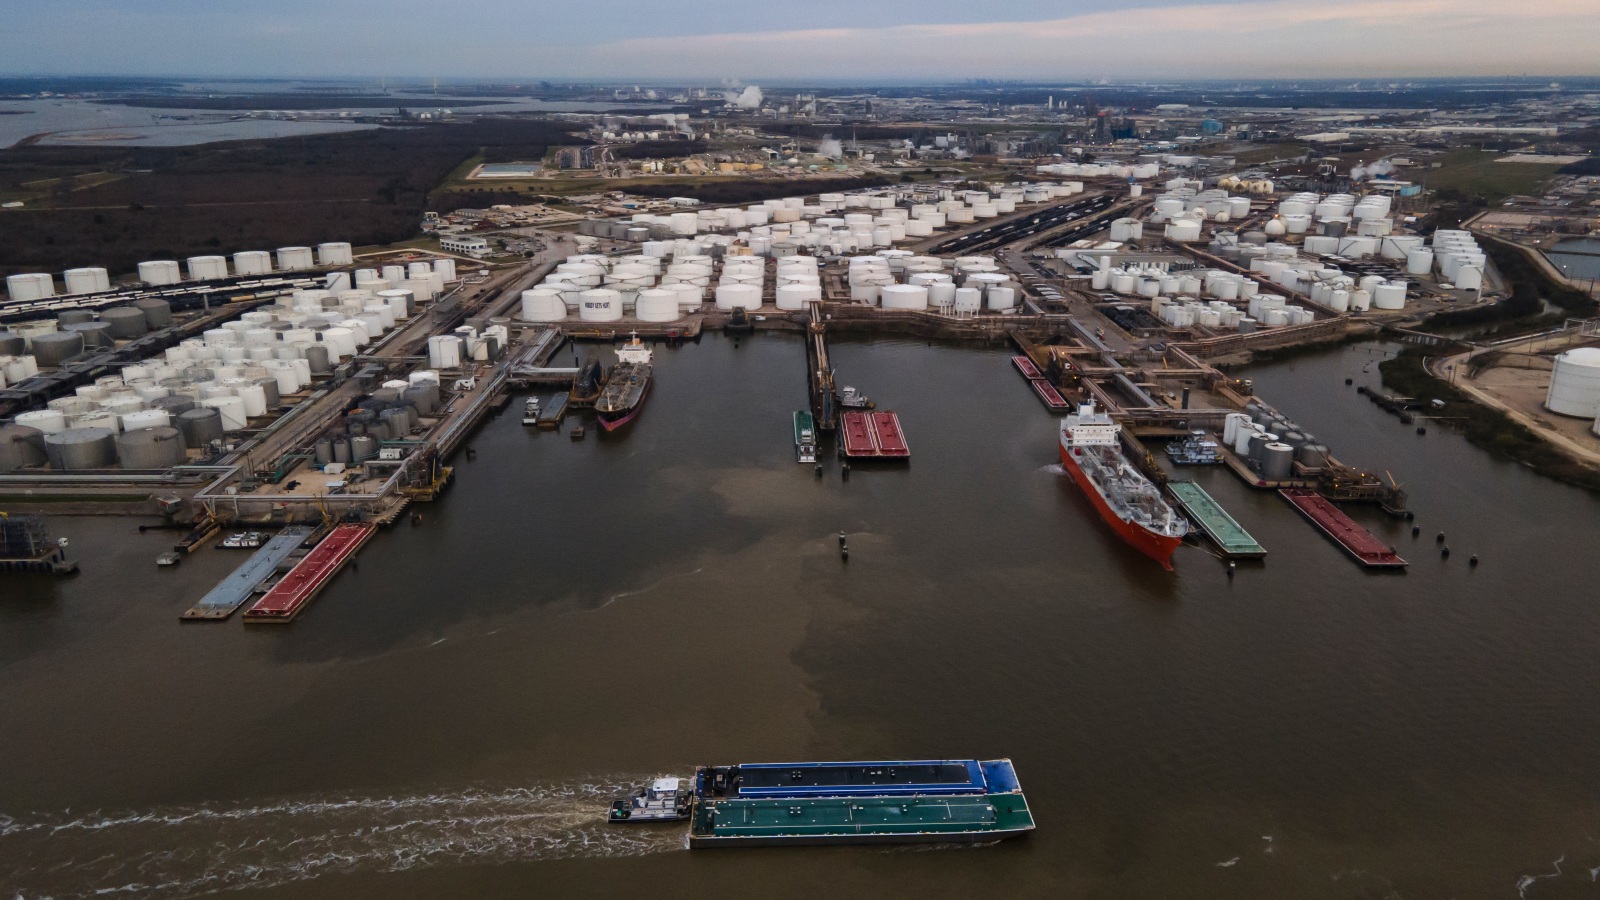 Barges float through the Houston Ship Channel’s murky waters